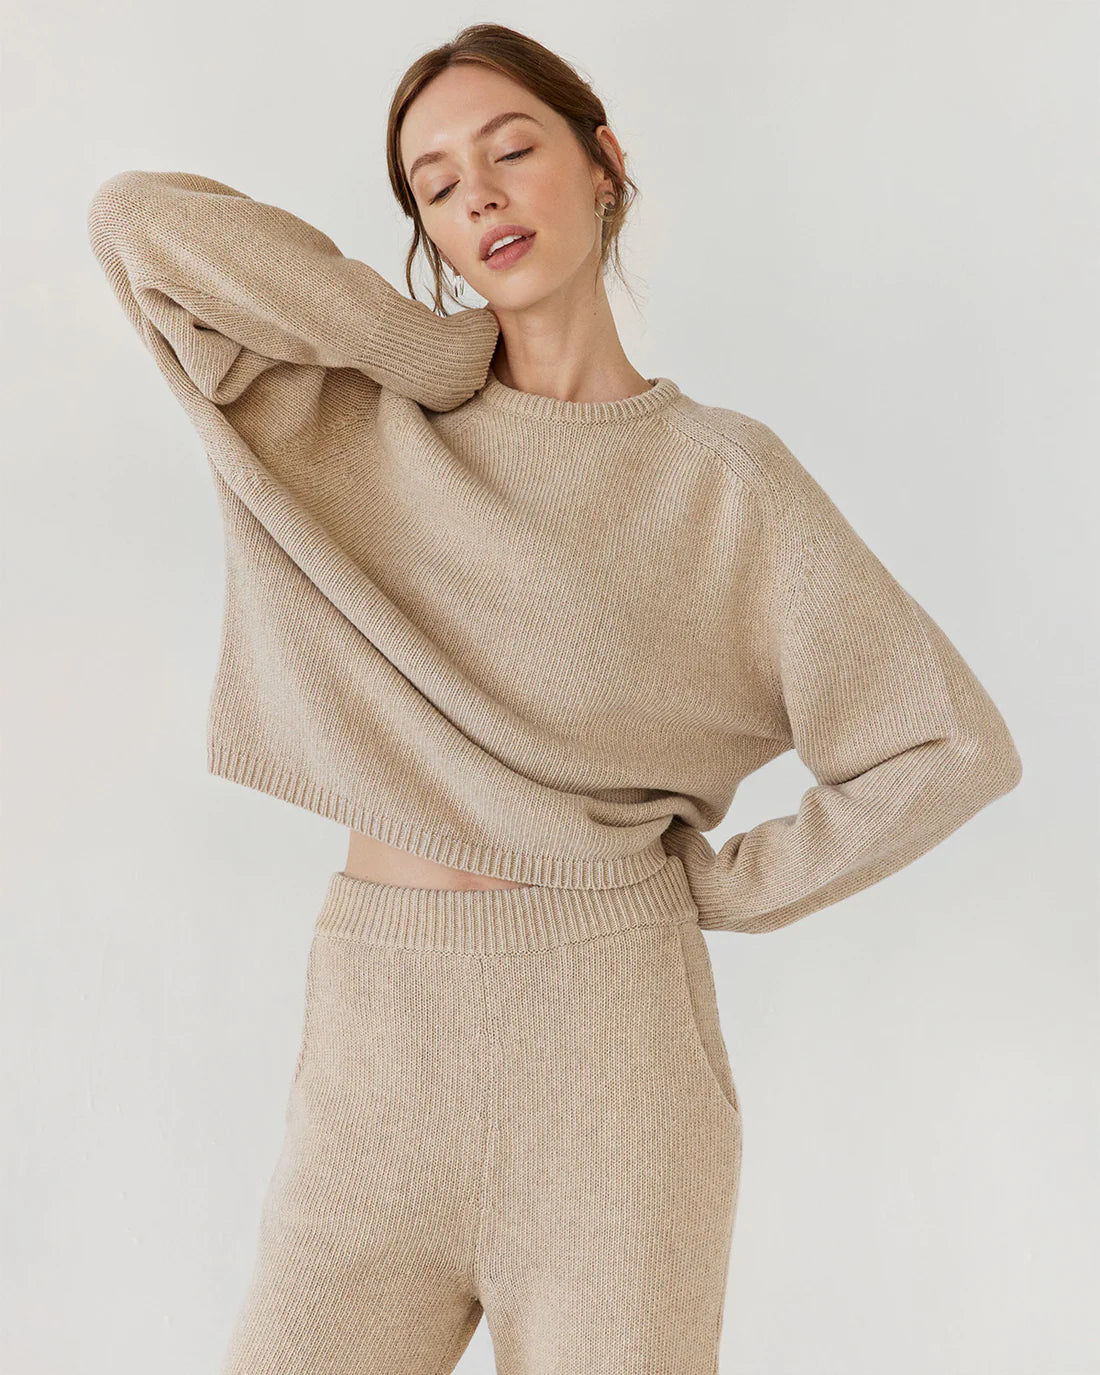 Pušynas Recycled Wool Sweater